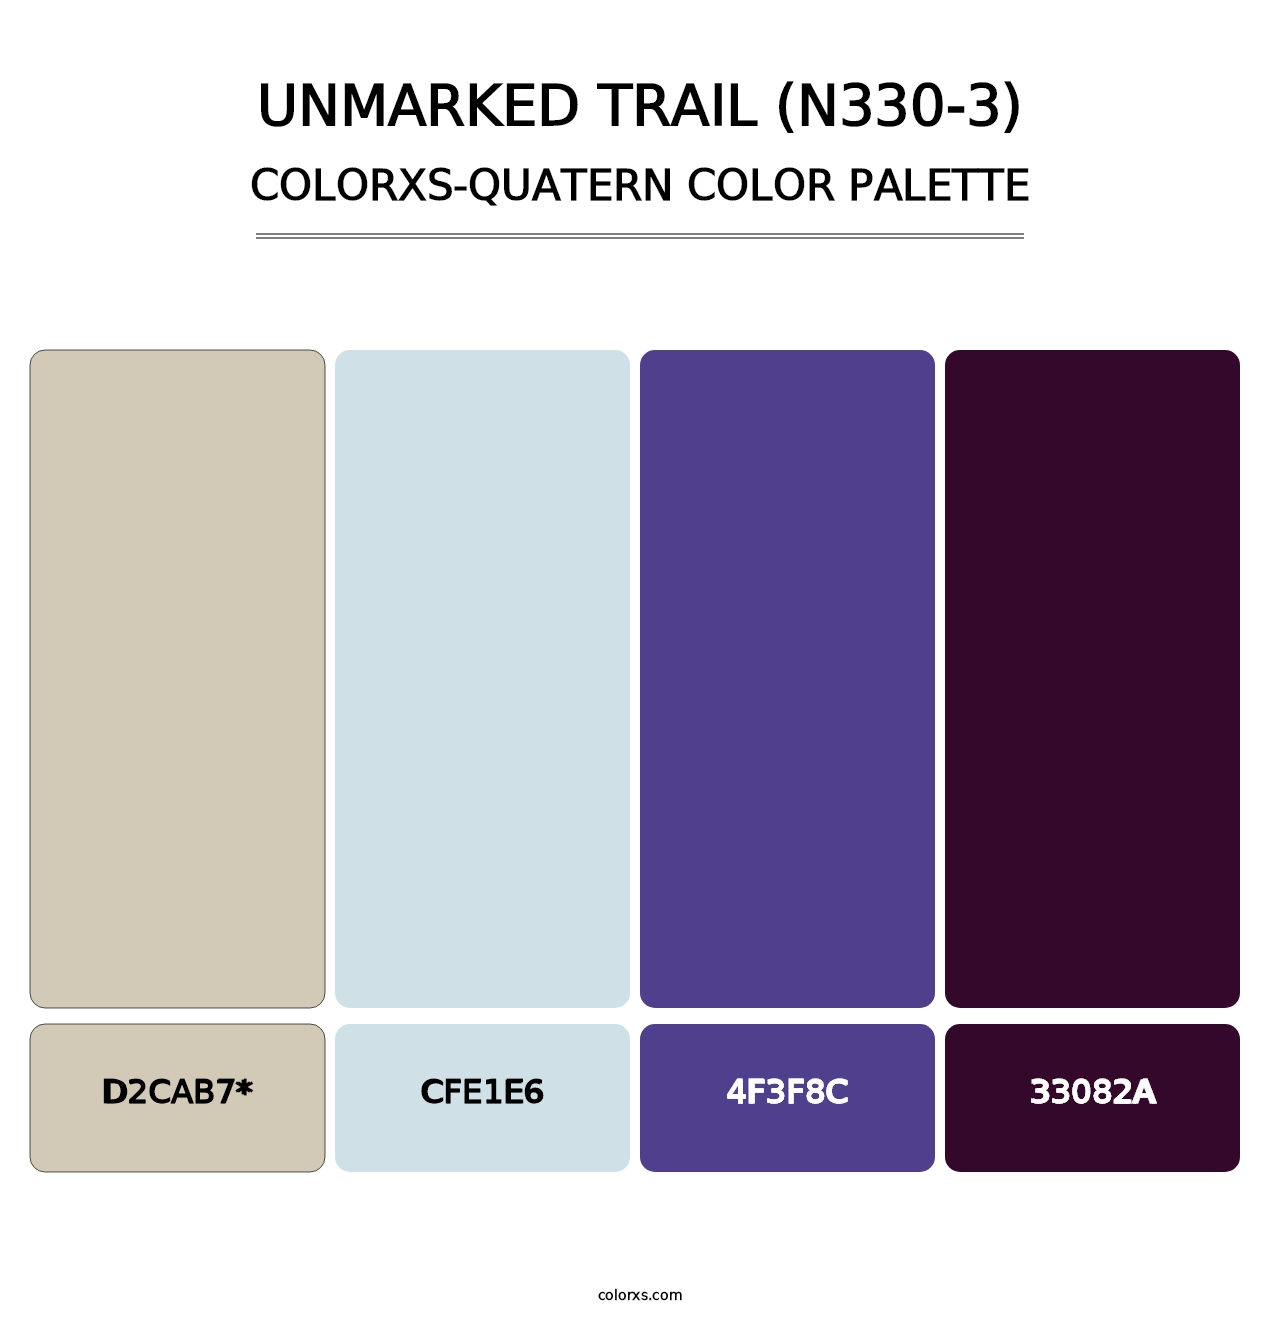 Unmarked Trail (N330-3) - Colorxs Quatern Palette